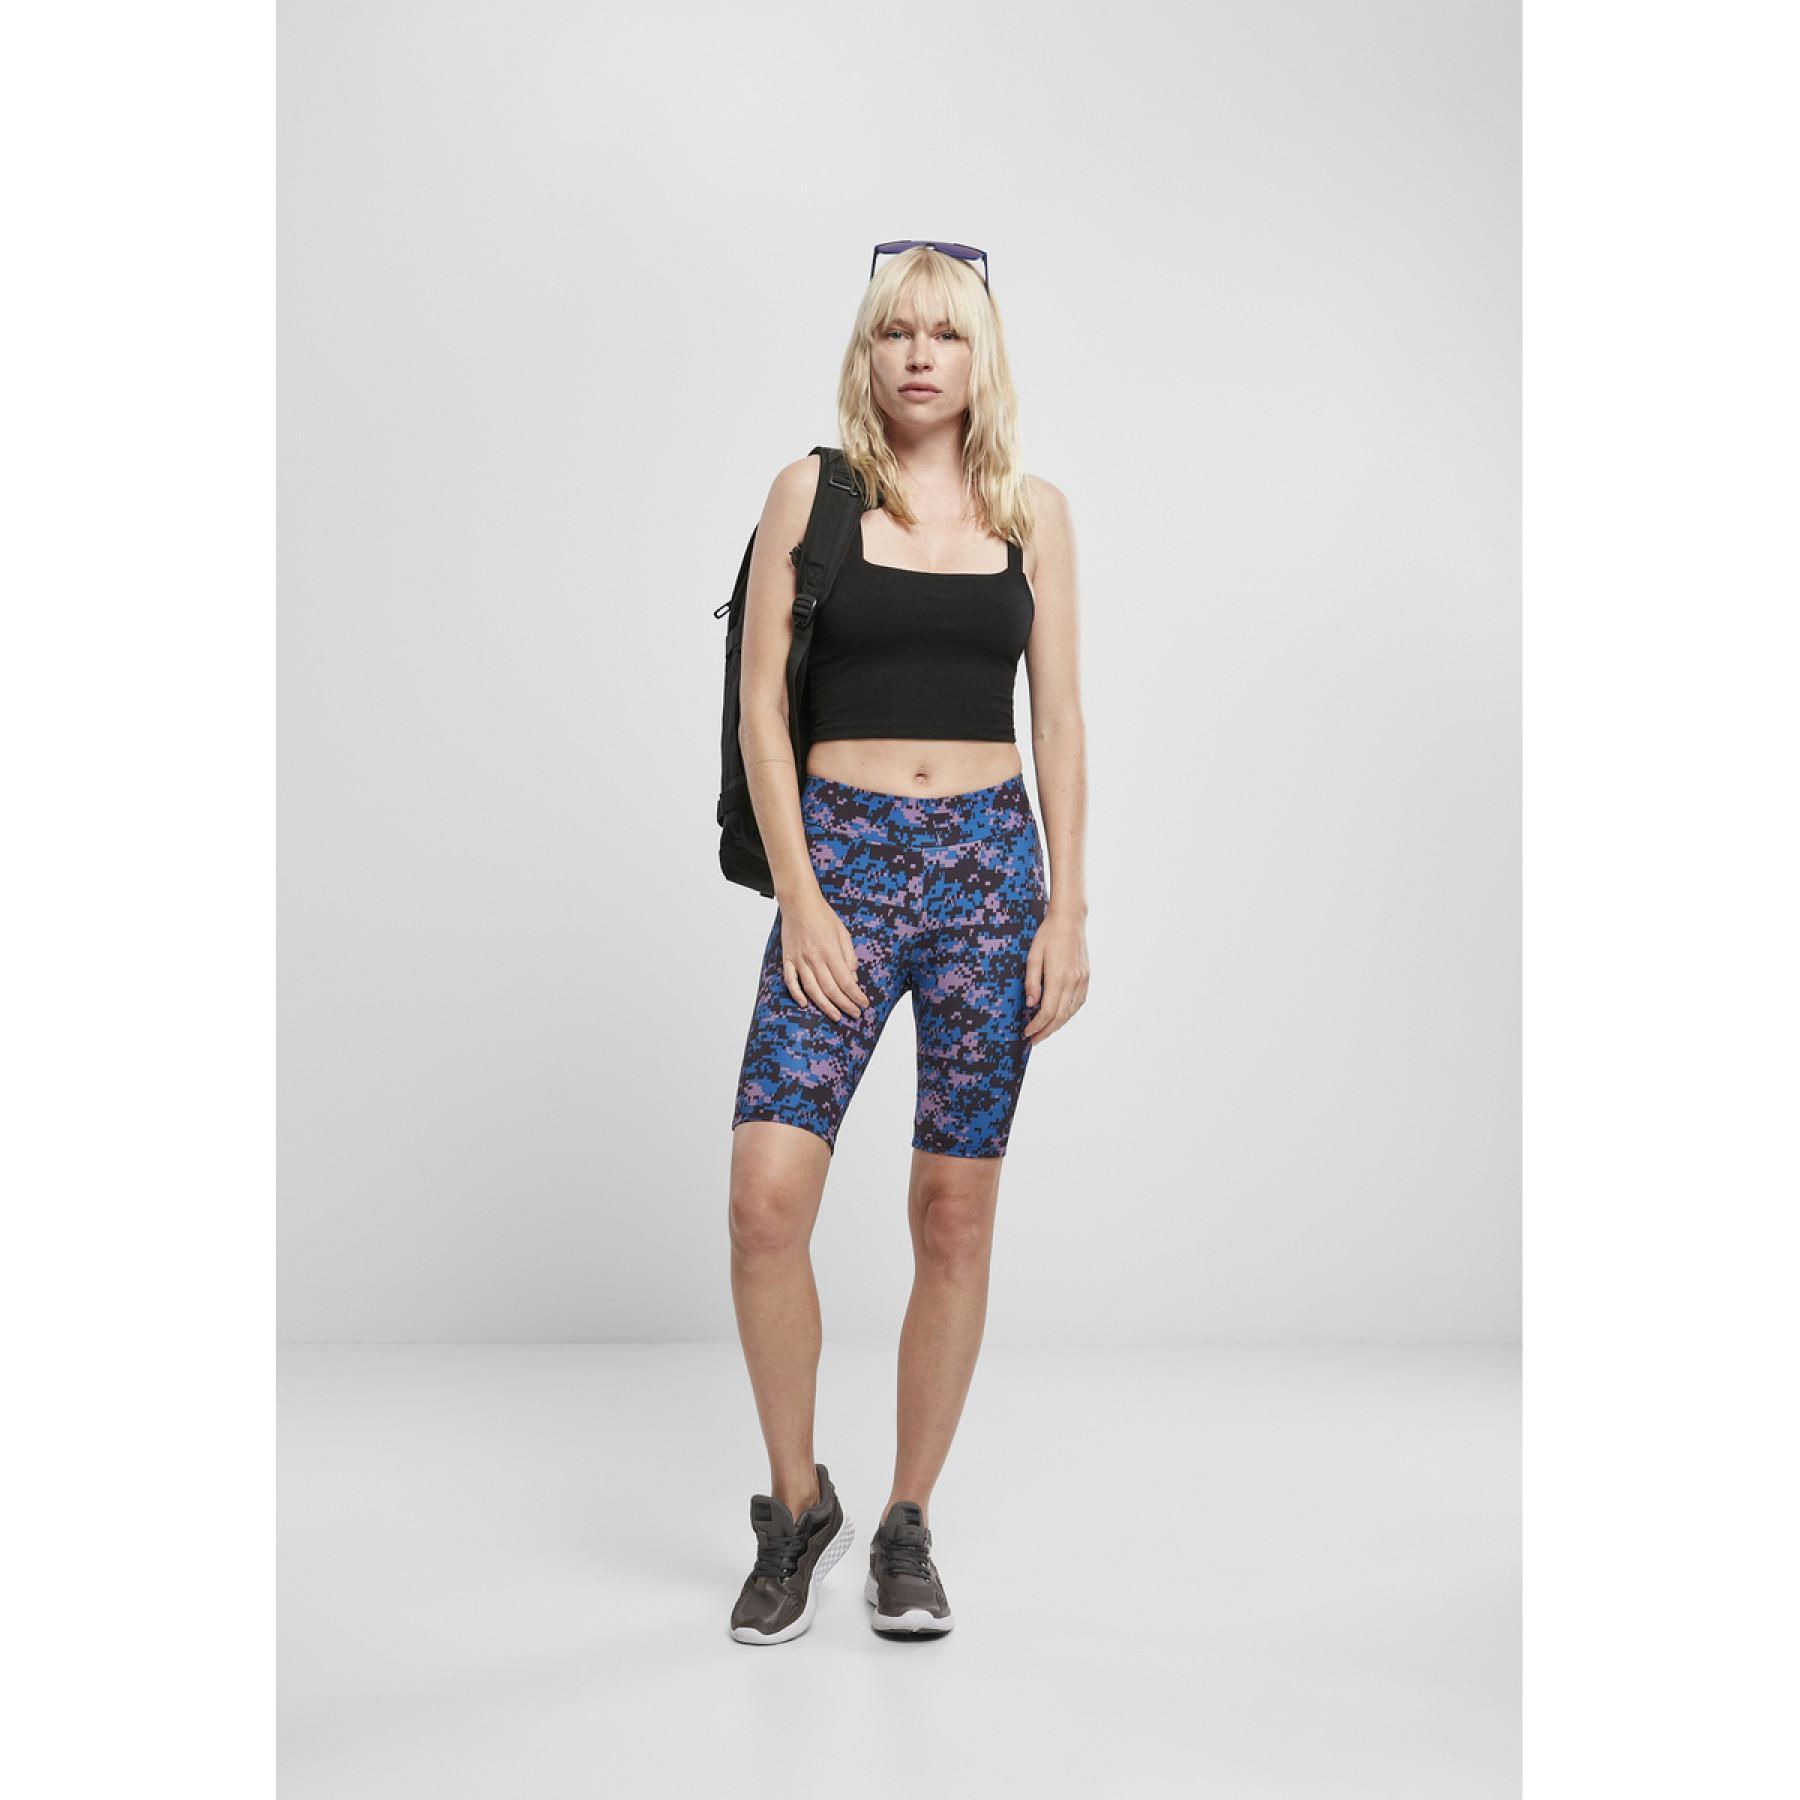 Cycling shorts for women and Shorts Classics high waist - tech - Lifestyle Skirts Woman - camouflage Urban